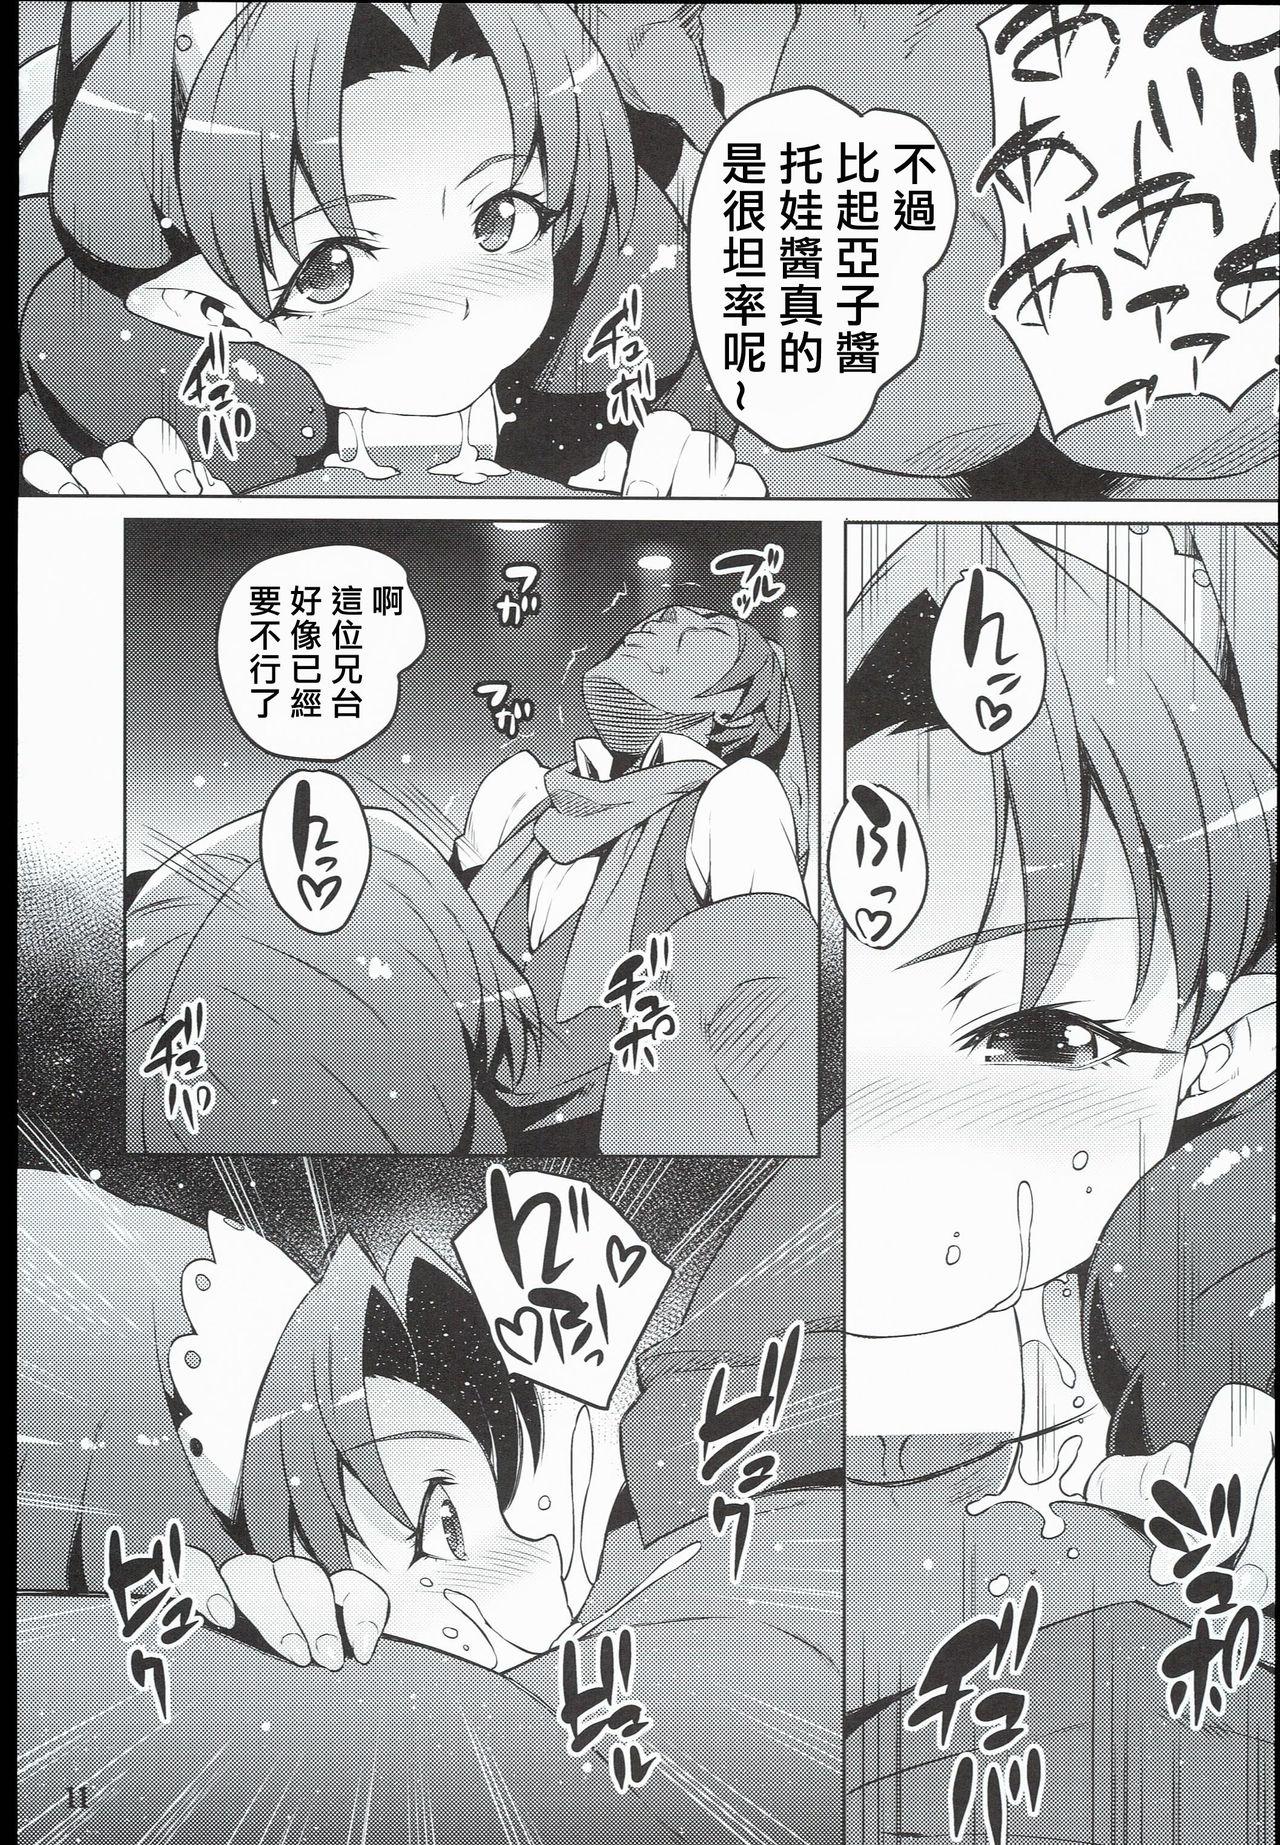 Cheating Wife Isekai Princess - Suite precure Go princess precure Girls Getting Fucked - Page 11